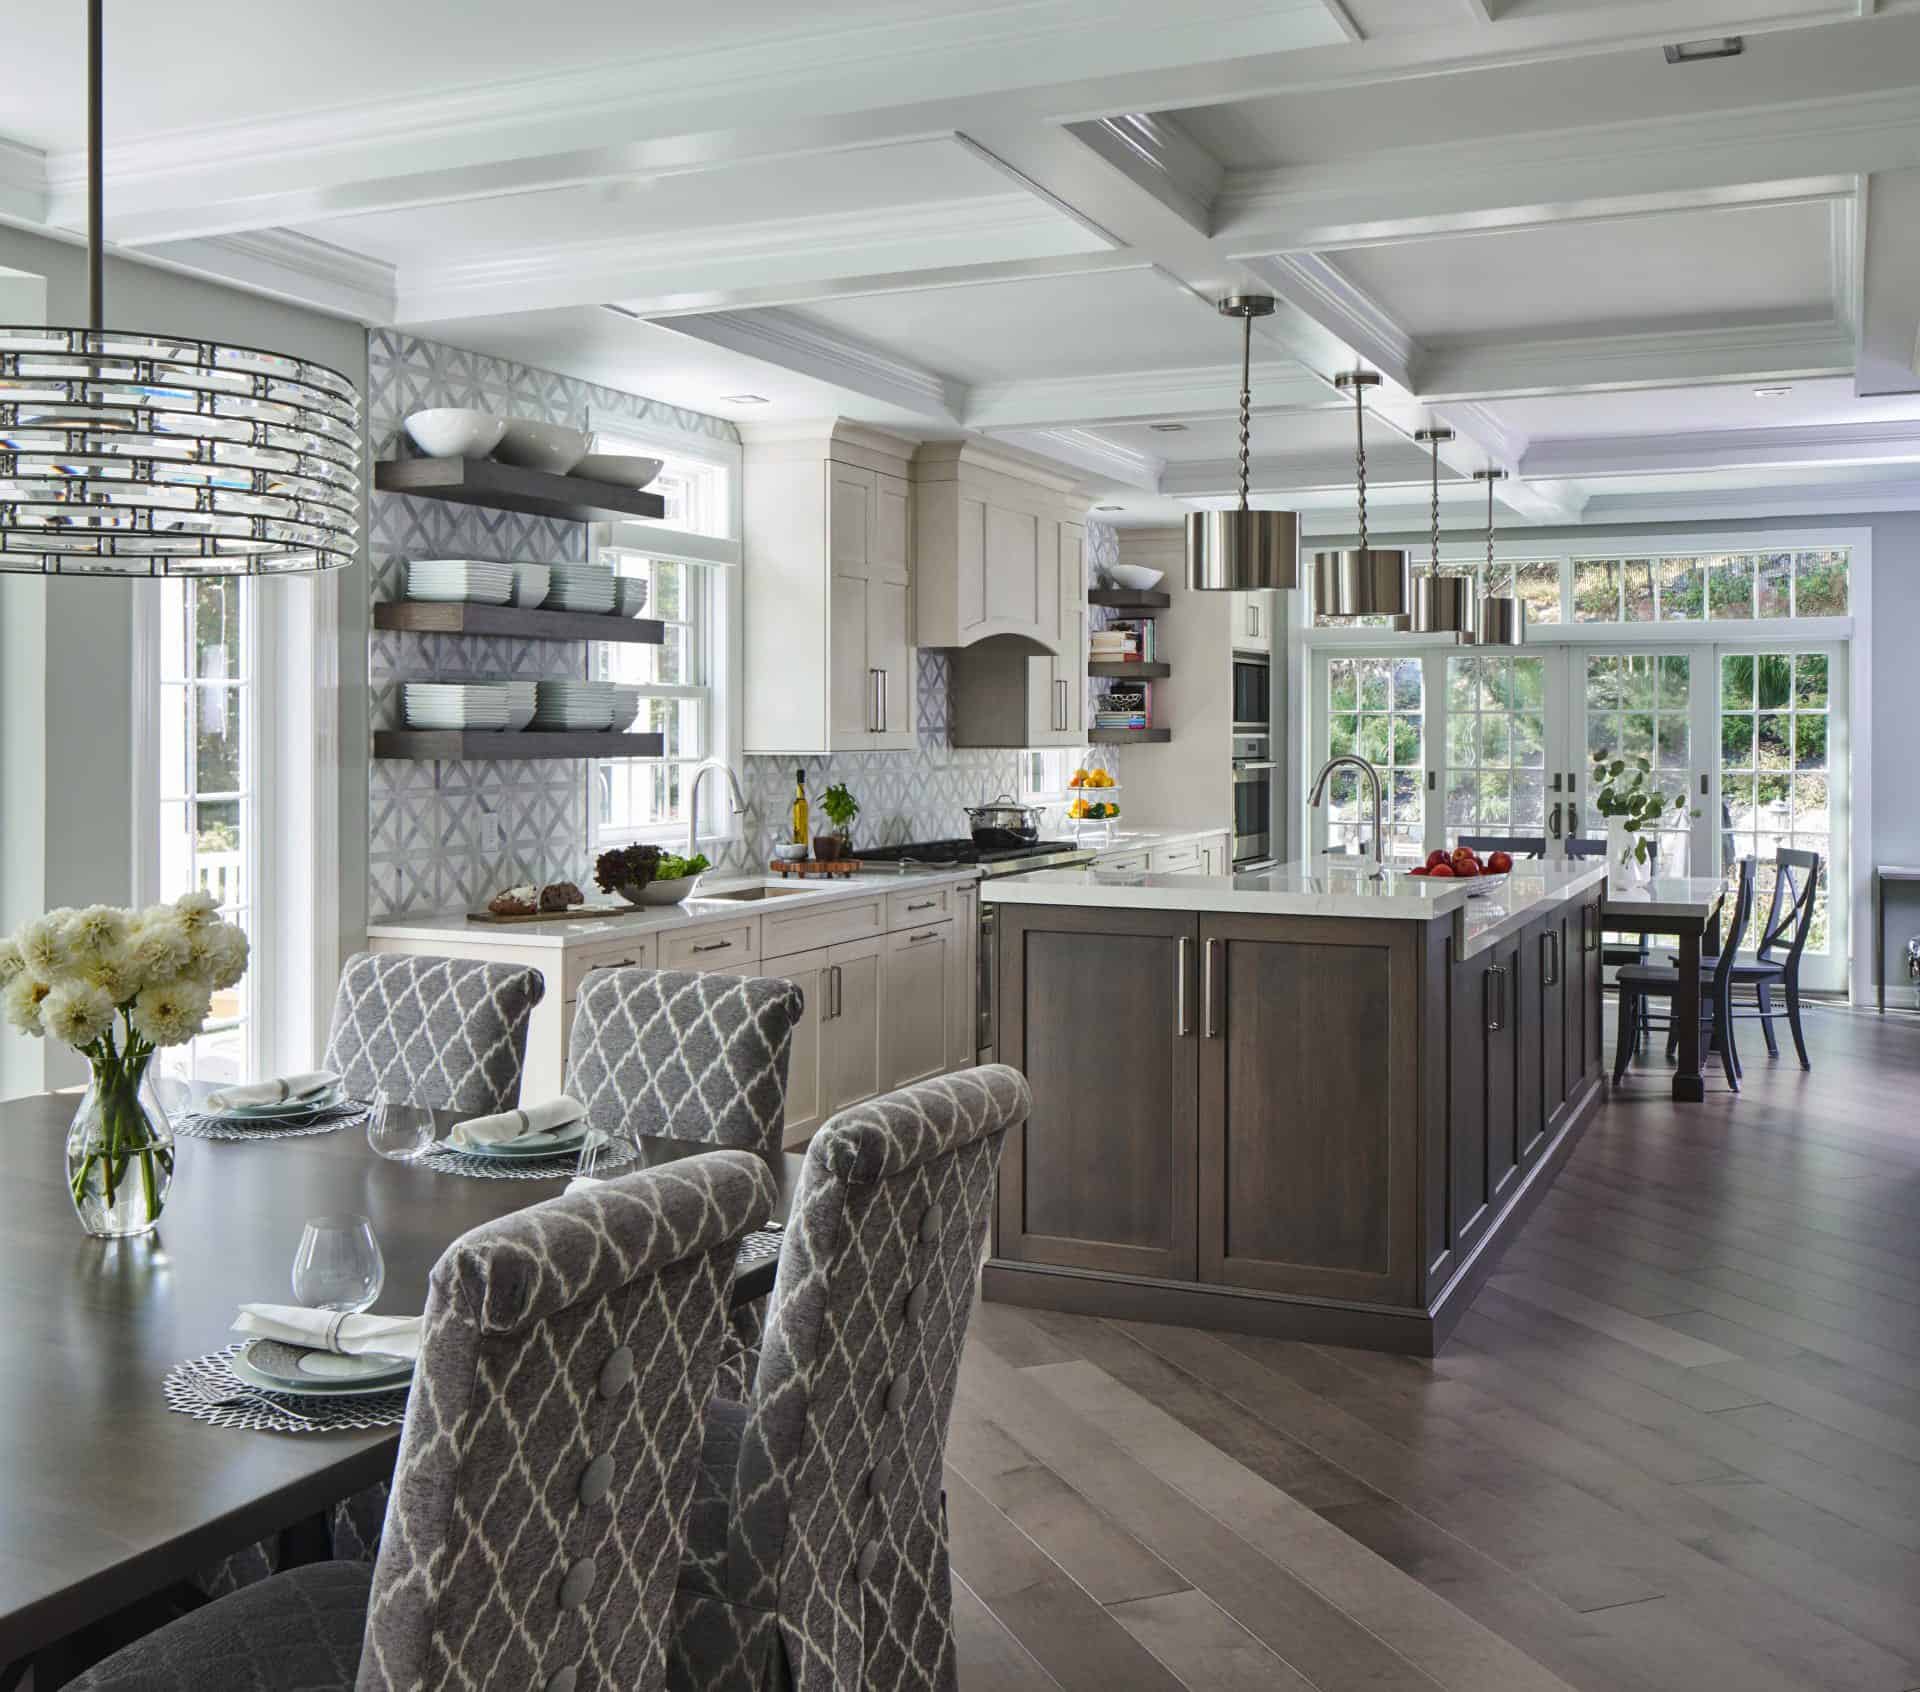 Classic White Kitchen with Grey Island and Fabric Covered Dining Chairs